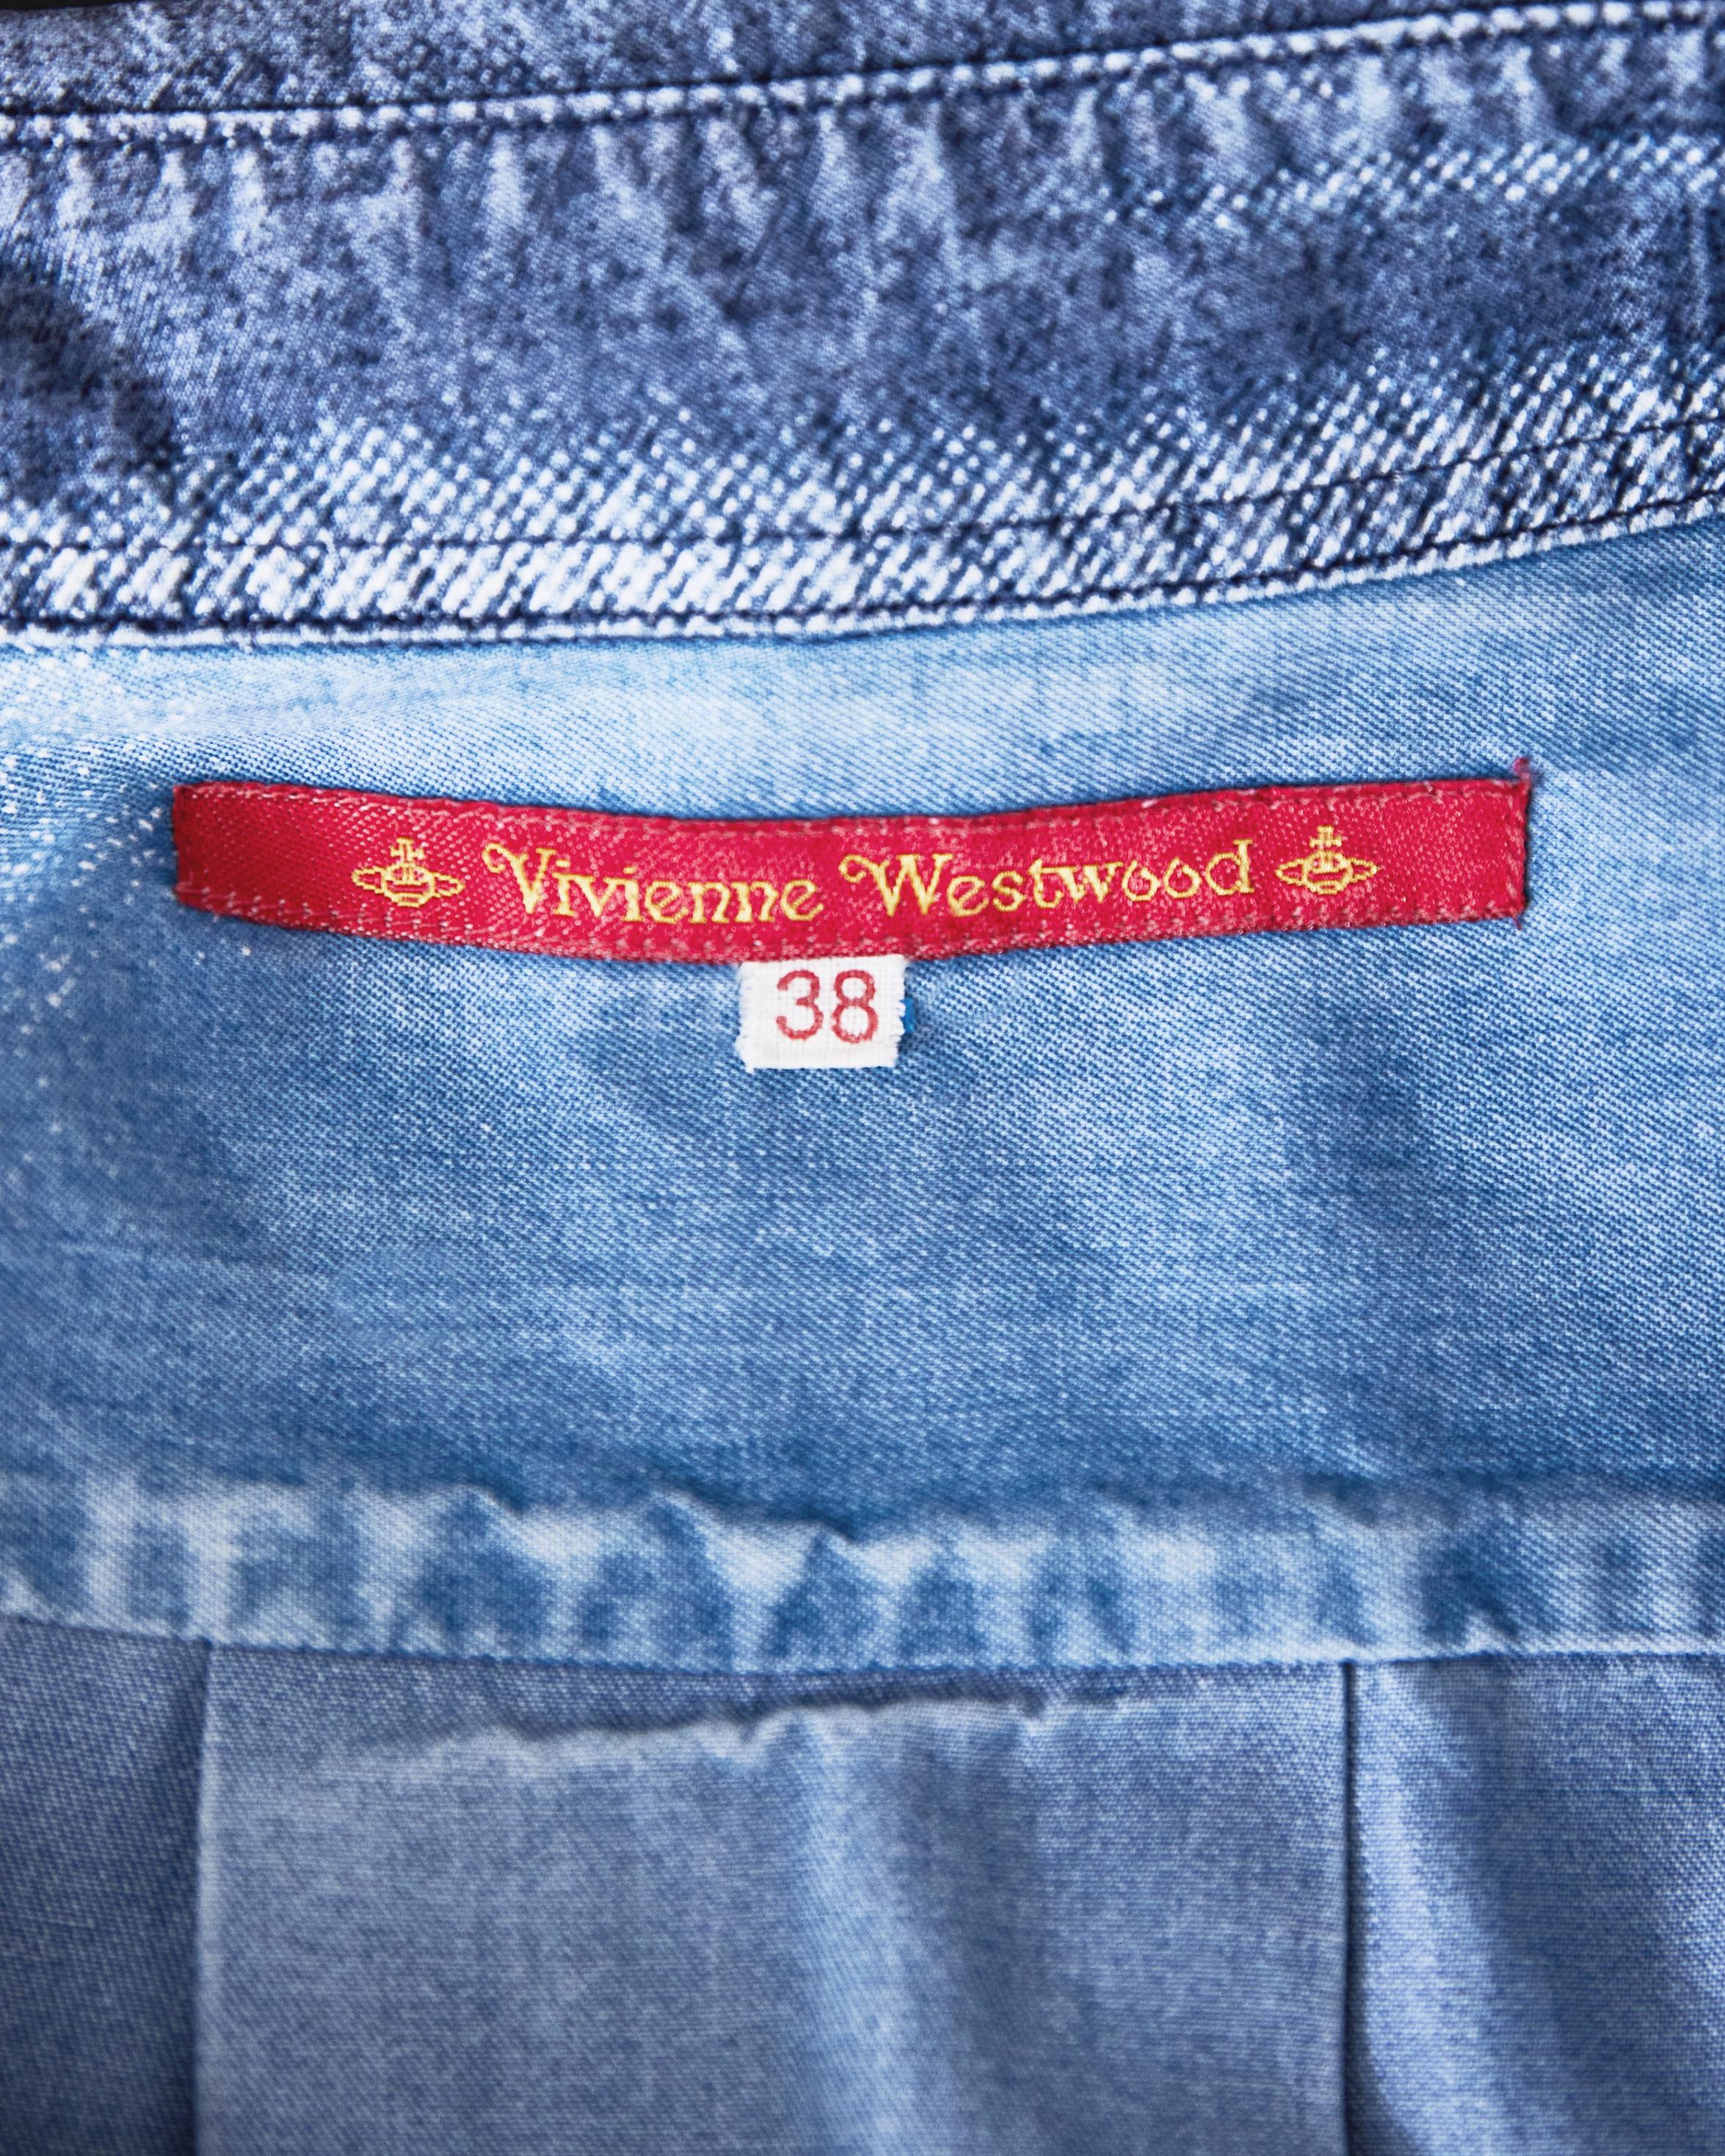 A/W 1992 Vivienne Westwood 'Always on Camera' Collection Rolls Royce Button-Up 3